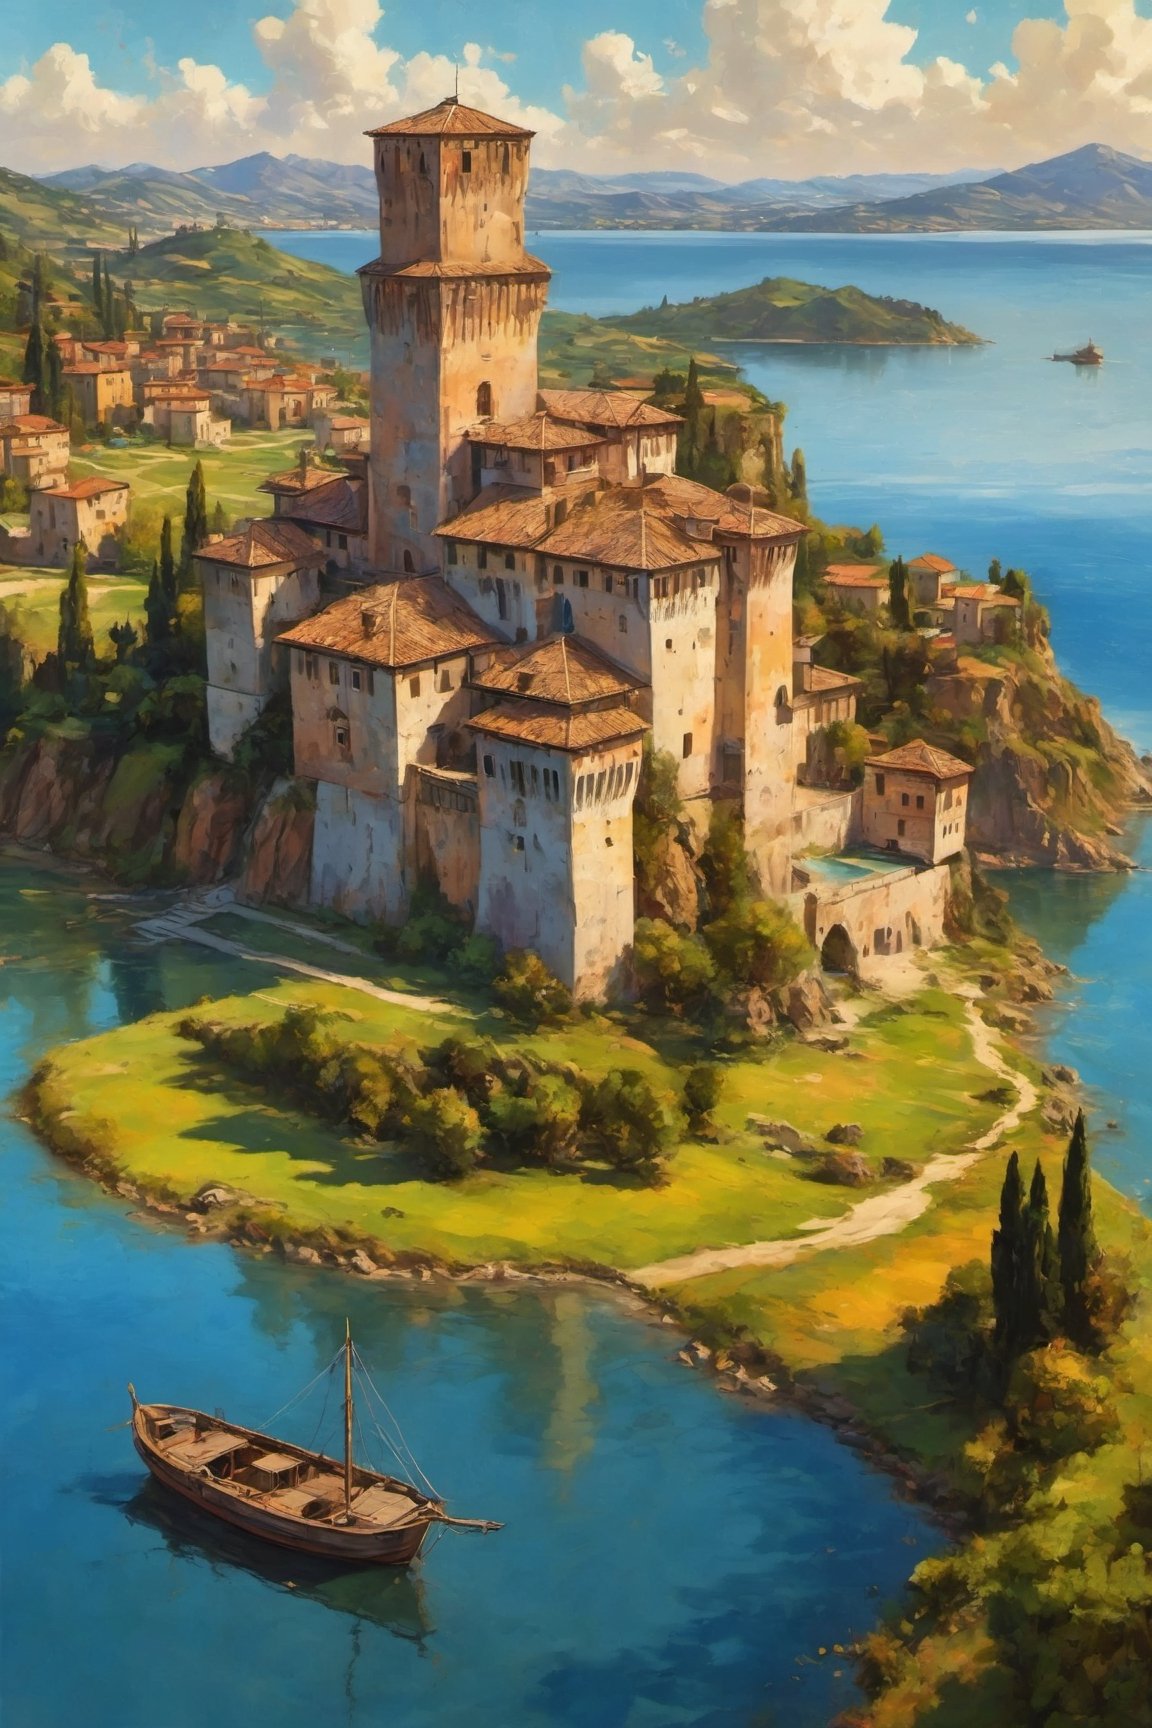 (Oil painting:1.3) of a wonderful (medieval castle in Italy:1.4), island in the middle of a lake, castle full view closeup from the lake shore, (in the open:1.2), 14th century, (golden ratio:1.3), (medieval architecture:1.3), (mullioned windows:1.3), (brick wall:1.1), (towers with merlons:1.2), (broad sky view:1.2), beautiful blue sky with imposing cumulonembus clouds, small boats, BREAK, (aerial view:1.2), in the style of Jack Kirby, (soft diffused lighting:1.2), vignette, highest quality, original shot. BREAK Front view, well-lit, (perfect focus:1.2), award winning, detailed and intricate, masterpiece, itacstl,Comic Book-Style 2d,art_booster,ink ,oil paint